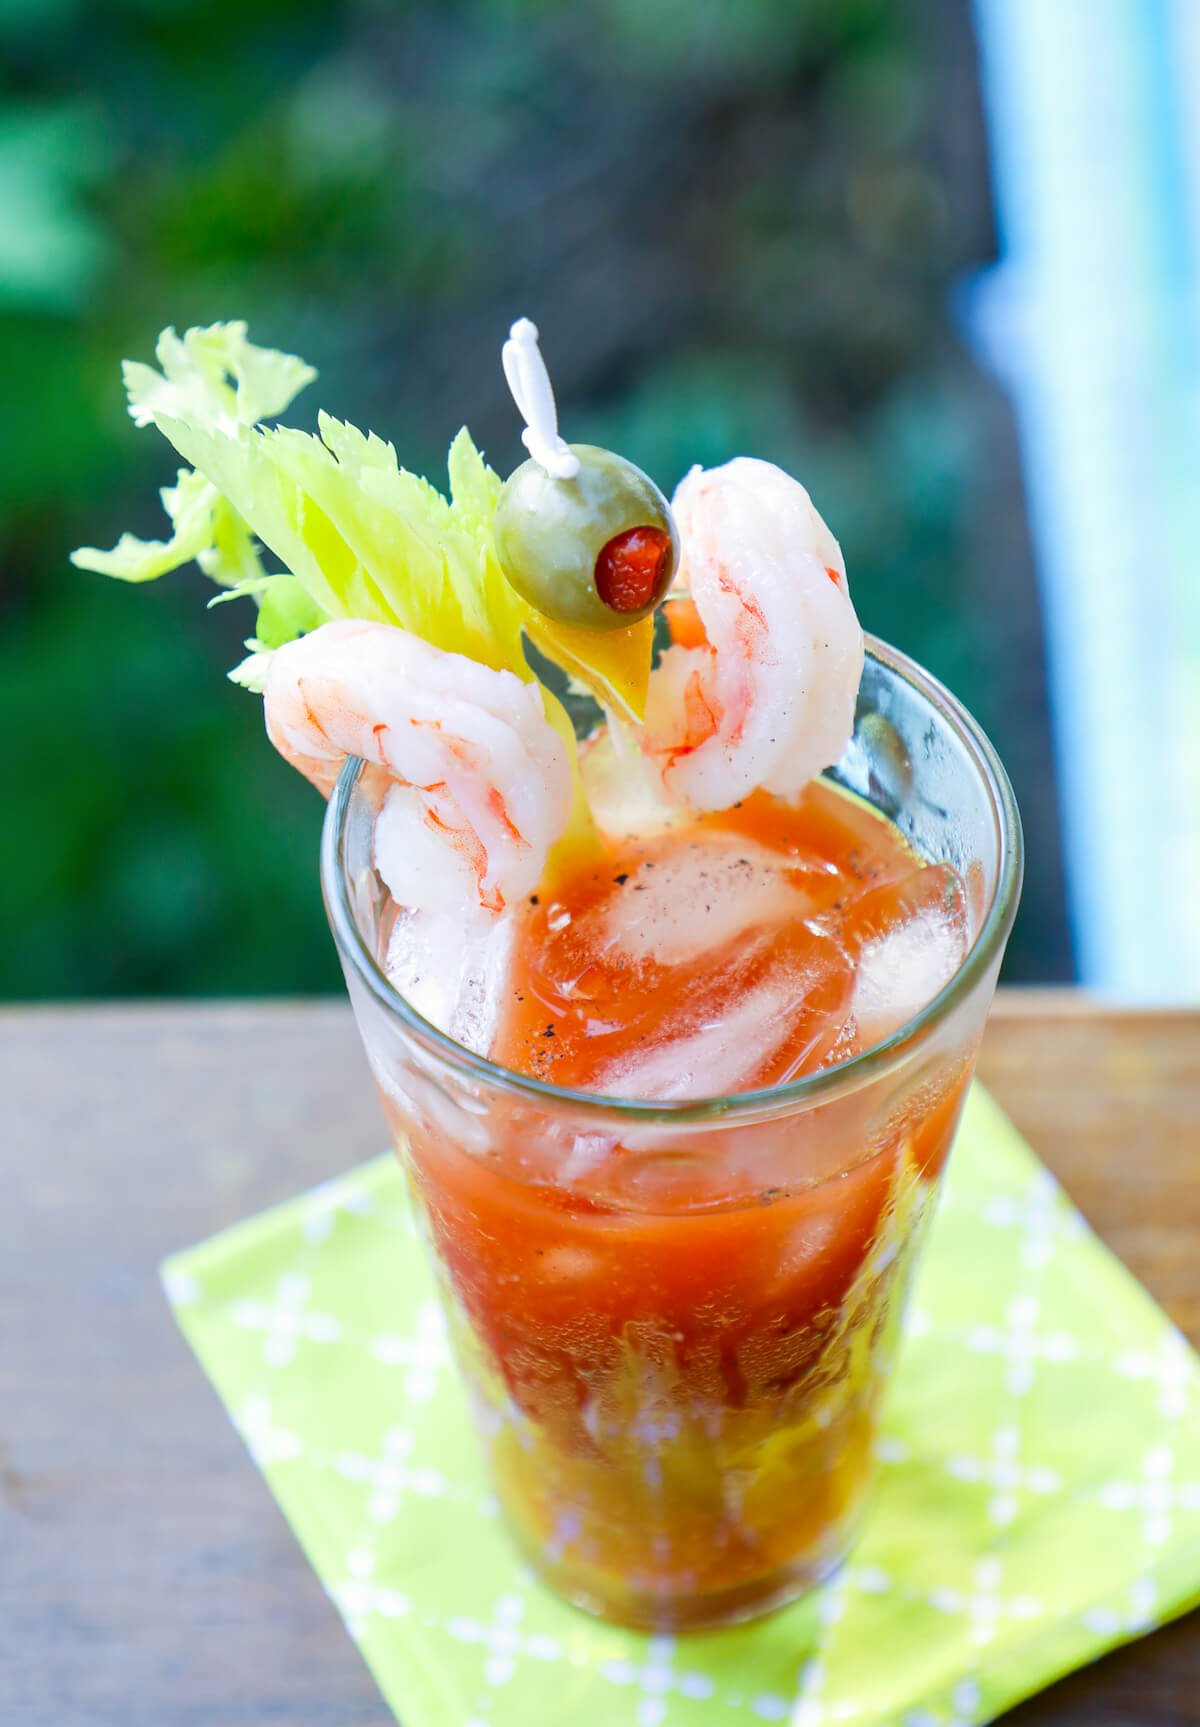 Bloody Mary top view with shrimp and olive garnish